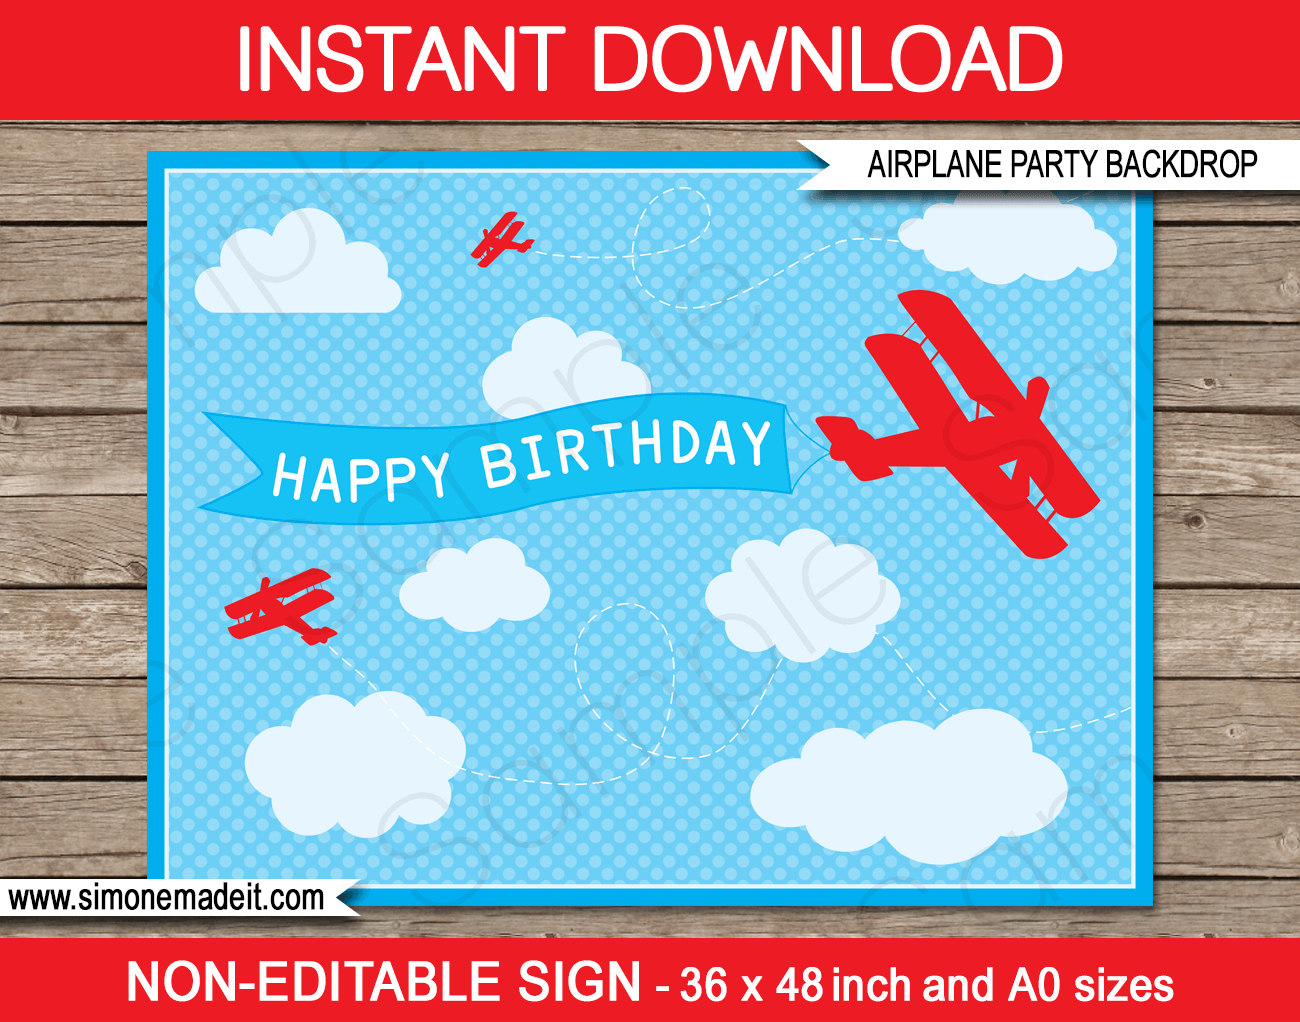 Printable Airplane Birthday Party Backdrop Sign | Party Decorations | DIY Template | INSTANT DOWNLOAD $4.50 via simonemadeit.com